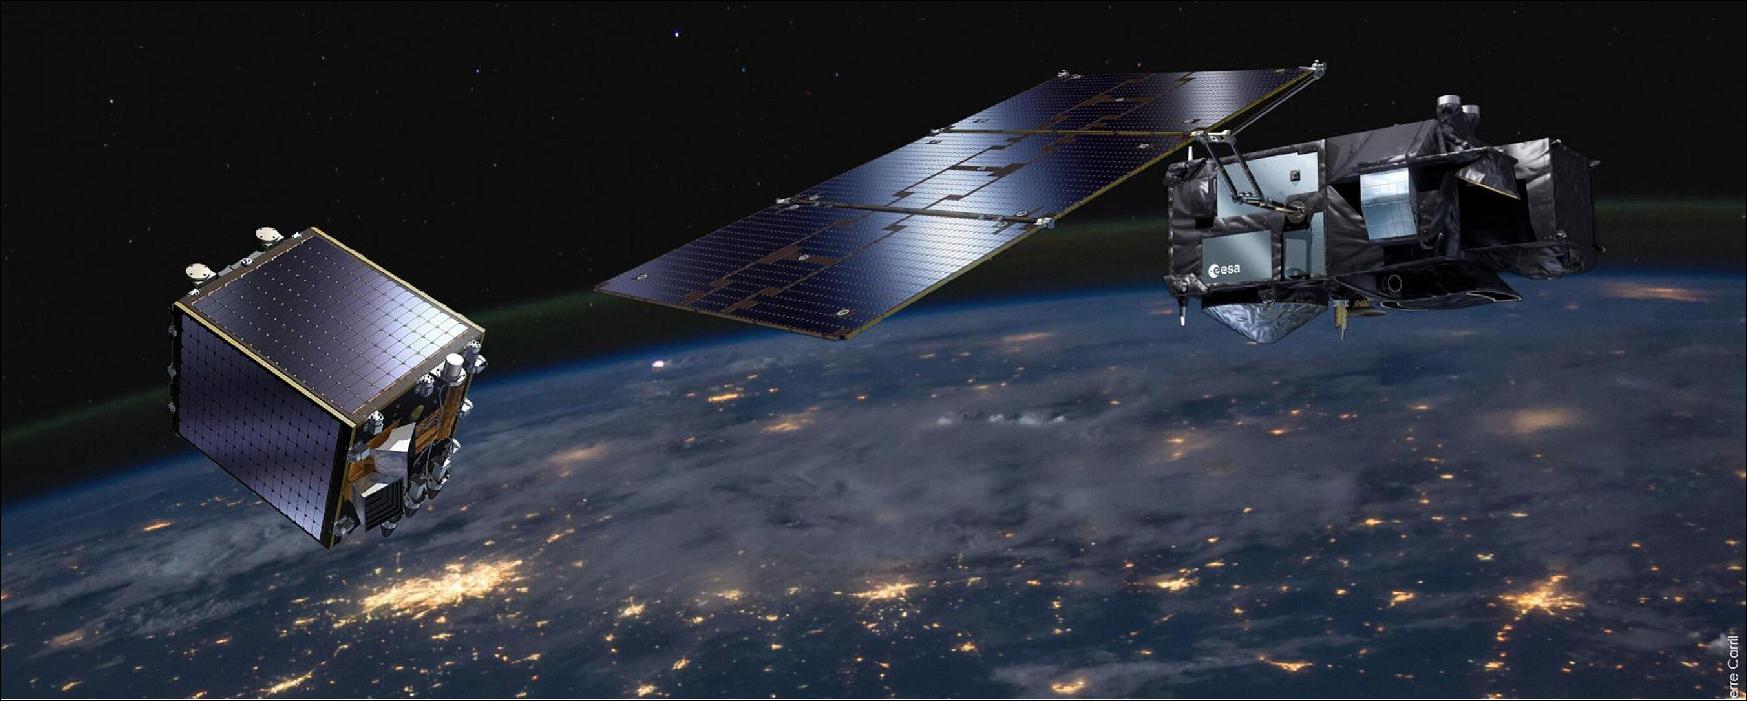 Figure 18: PROBA-V task (at left) is being taken up by the Copernicus Sentinel-3 satellite (at right), image credit: VITO